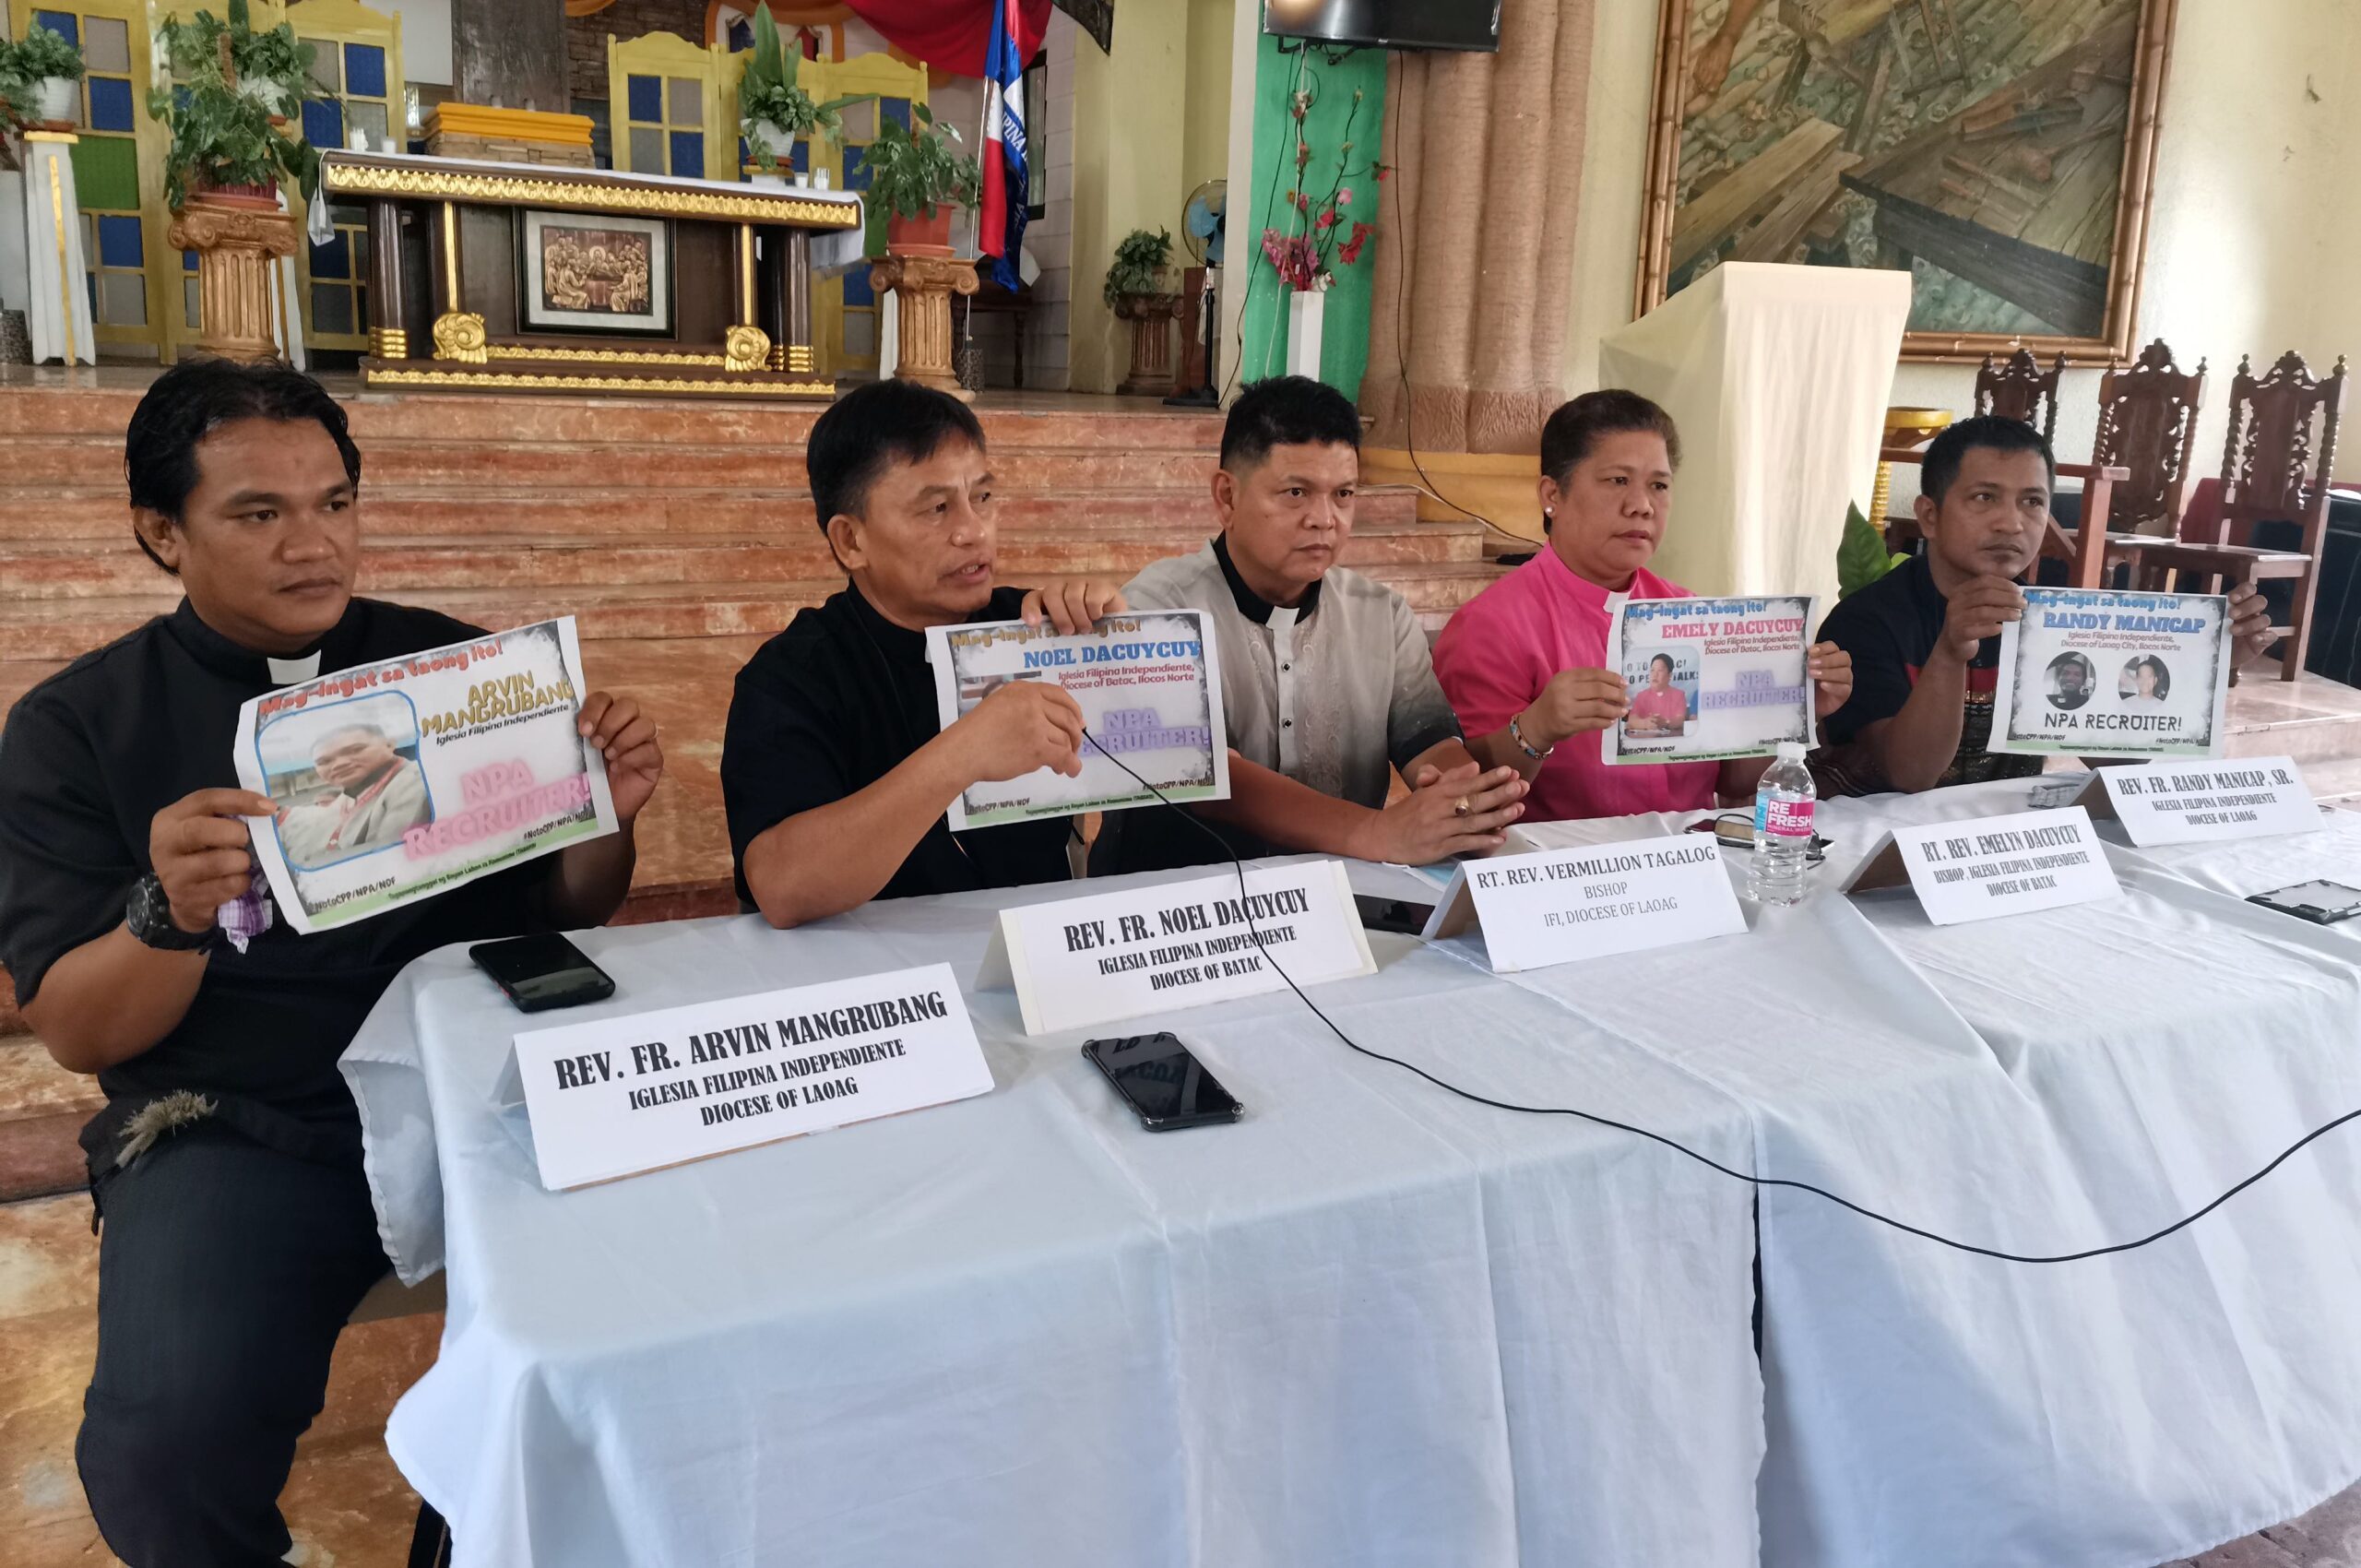 IFI woman bishop, church leaders red-tagged in Ilocos Norte